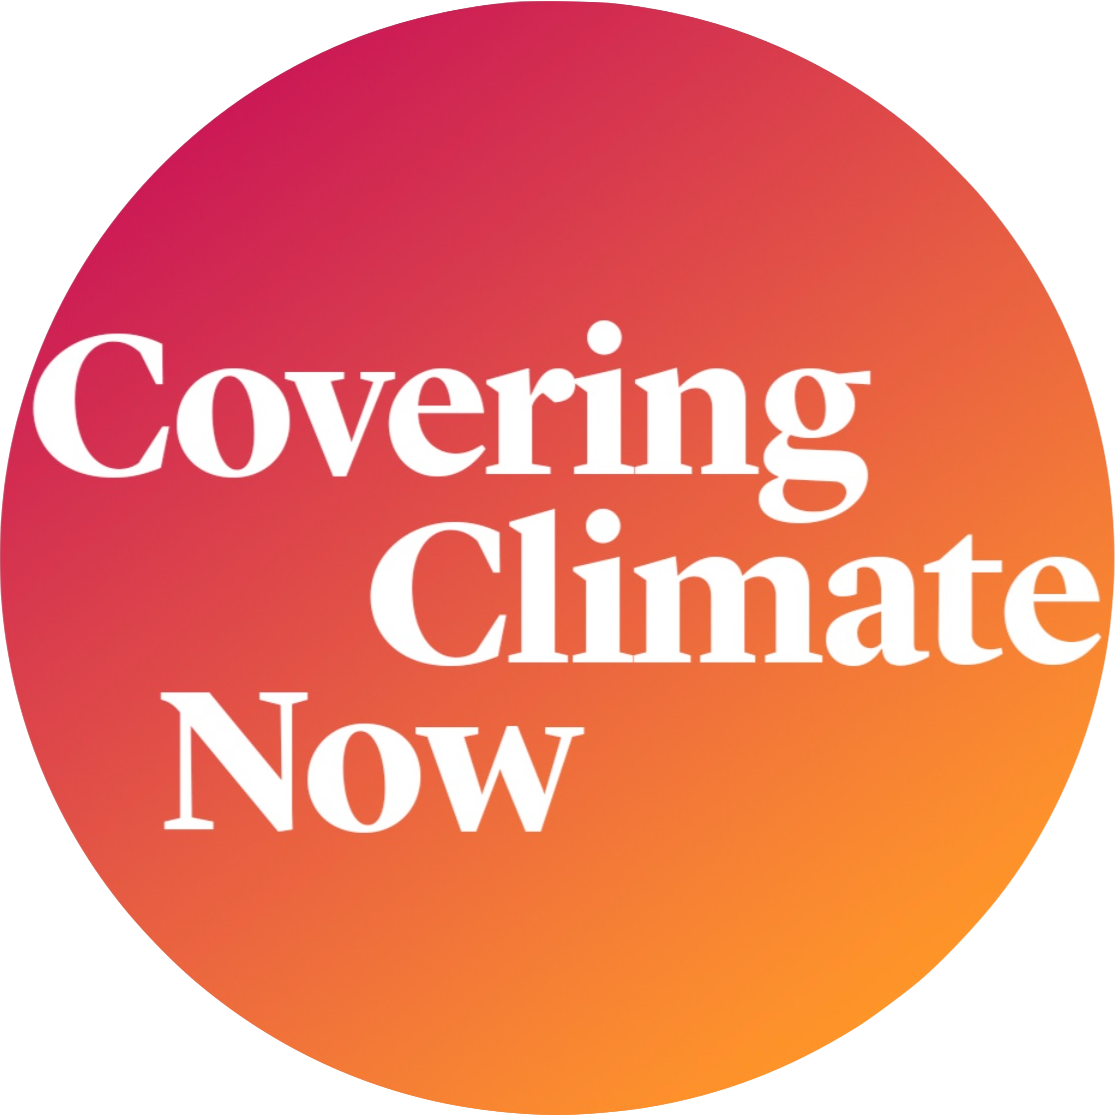 Media can do better: Getting serious about climate change - New Mexico In Depth